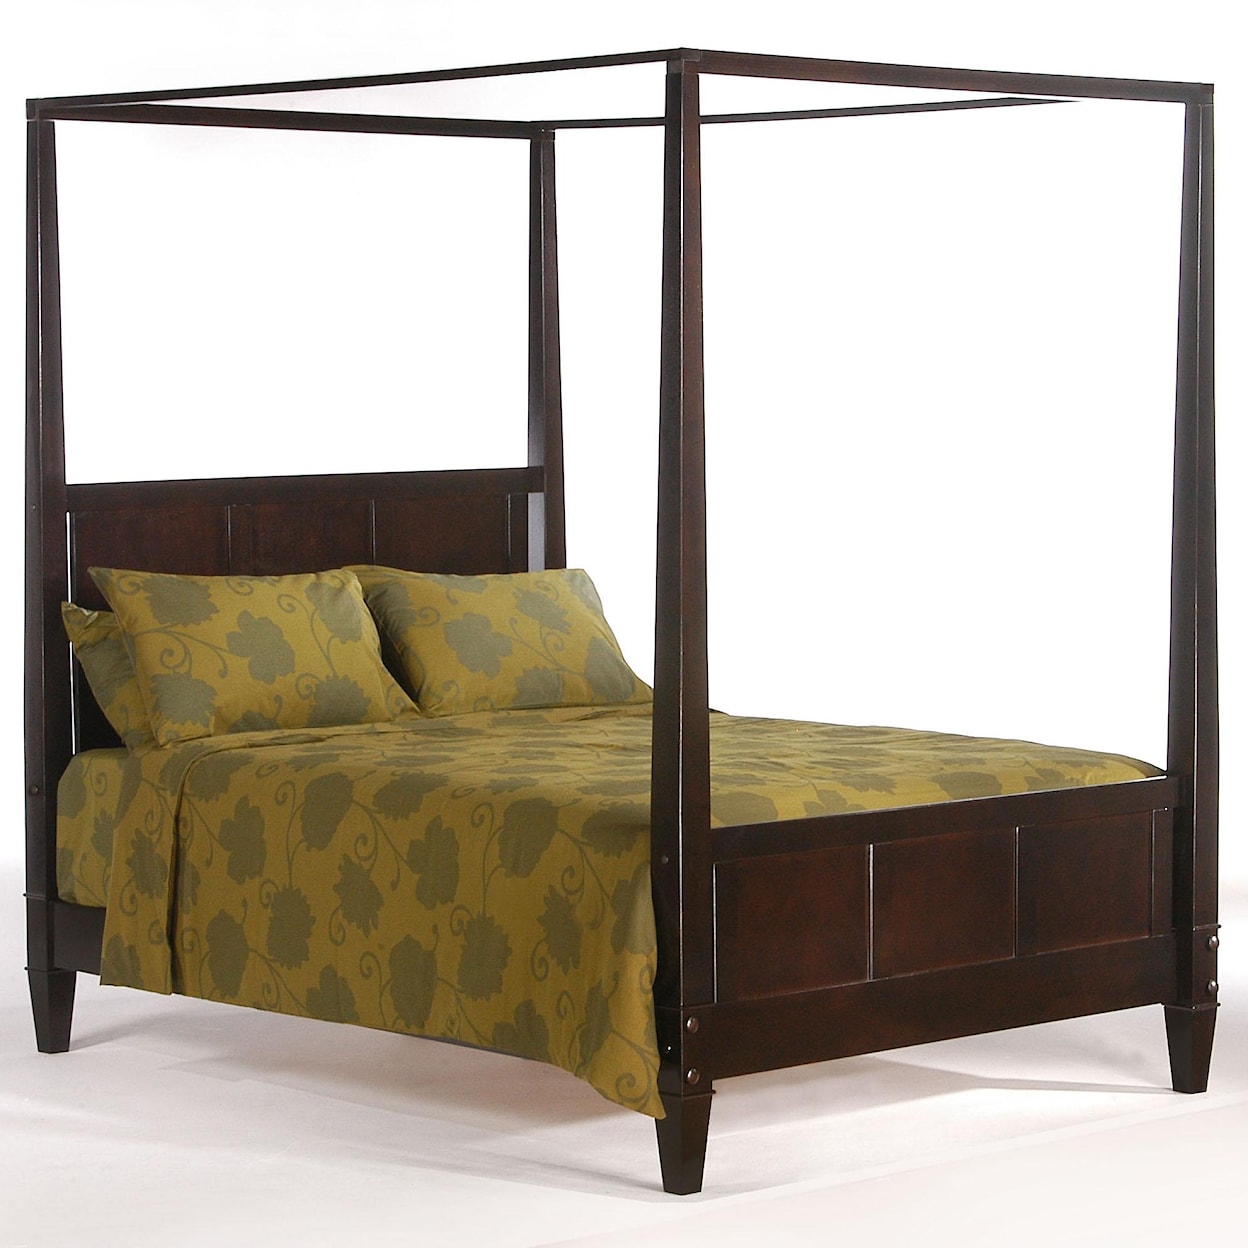 Night & Day Furniture Spice King Canopy Bed